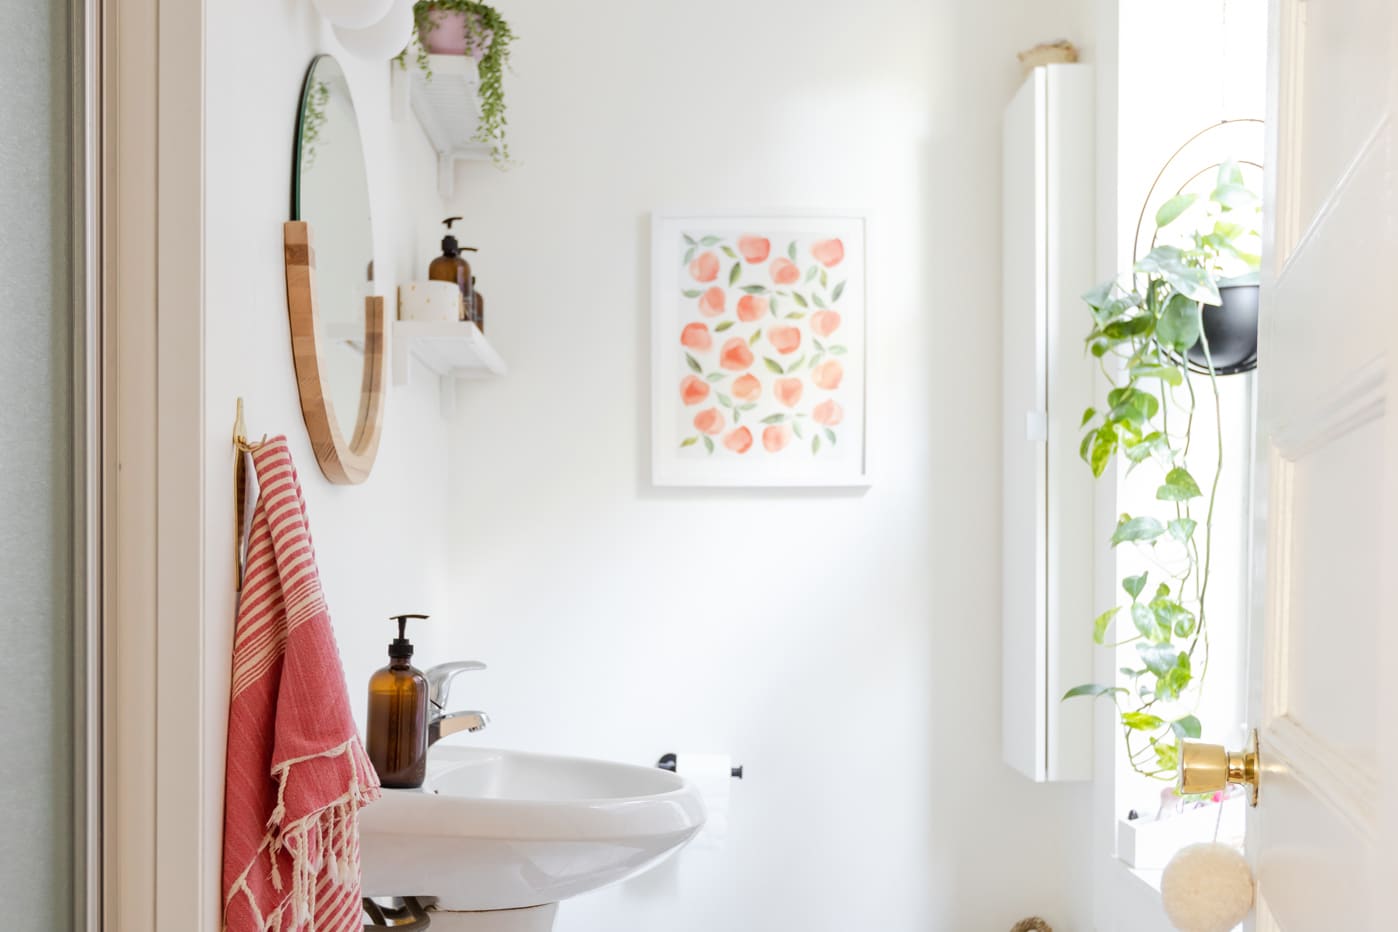 The 14 Things in Your Bathroom You Should Get Rid of Immediately